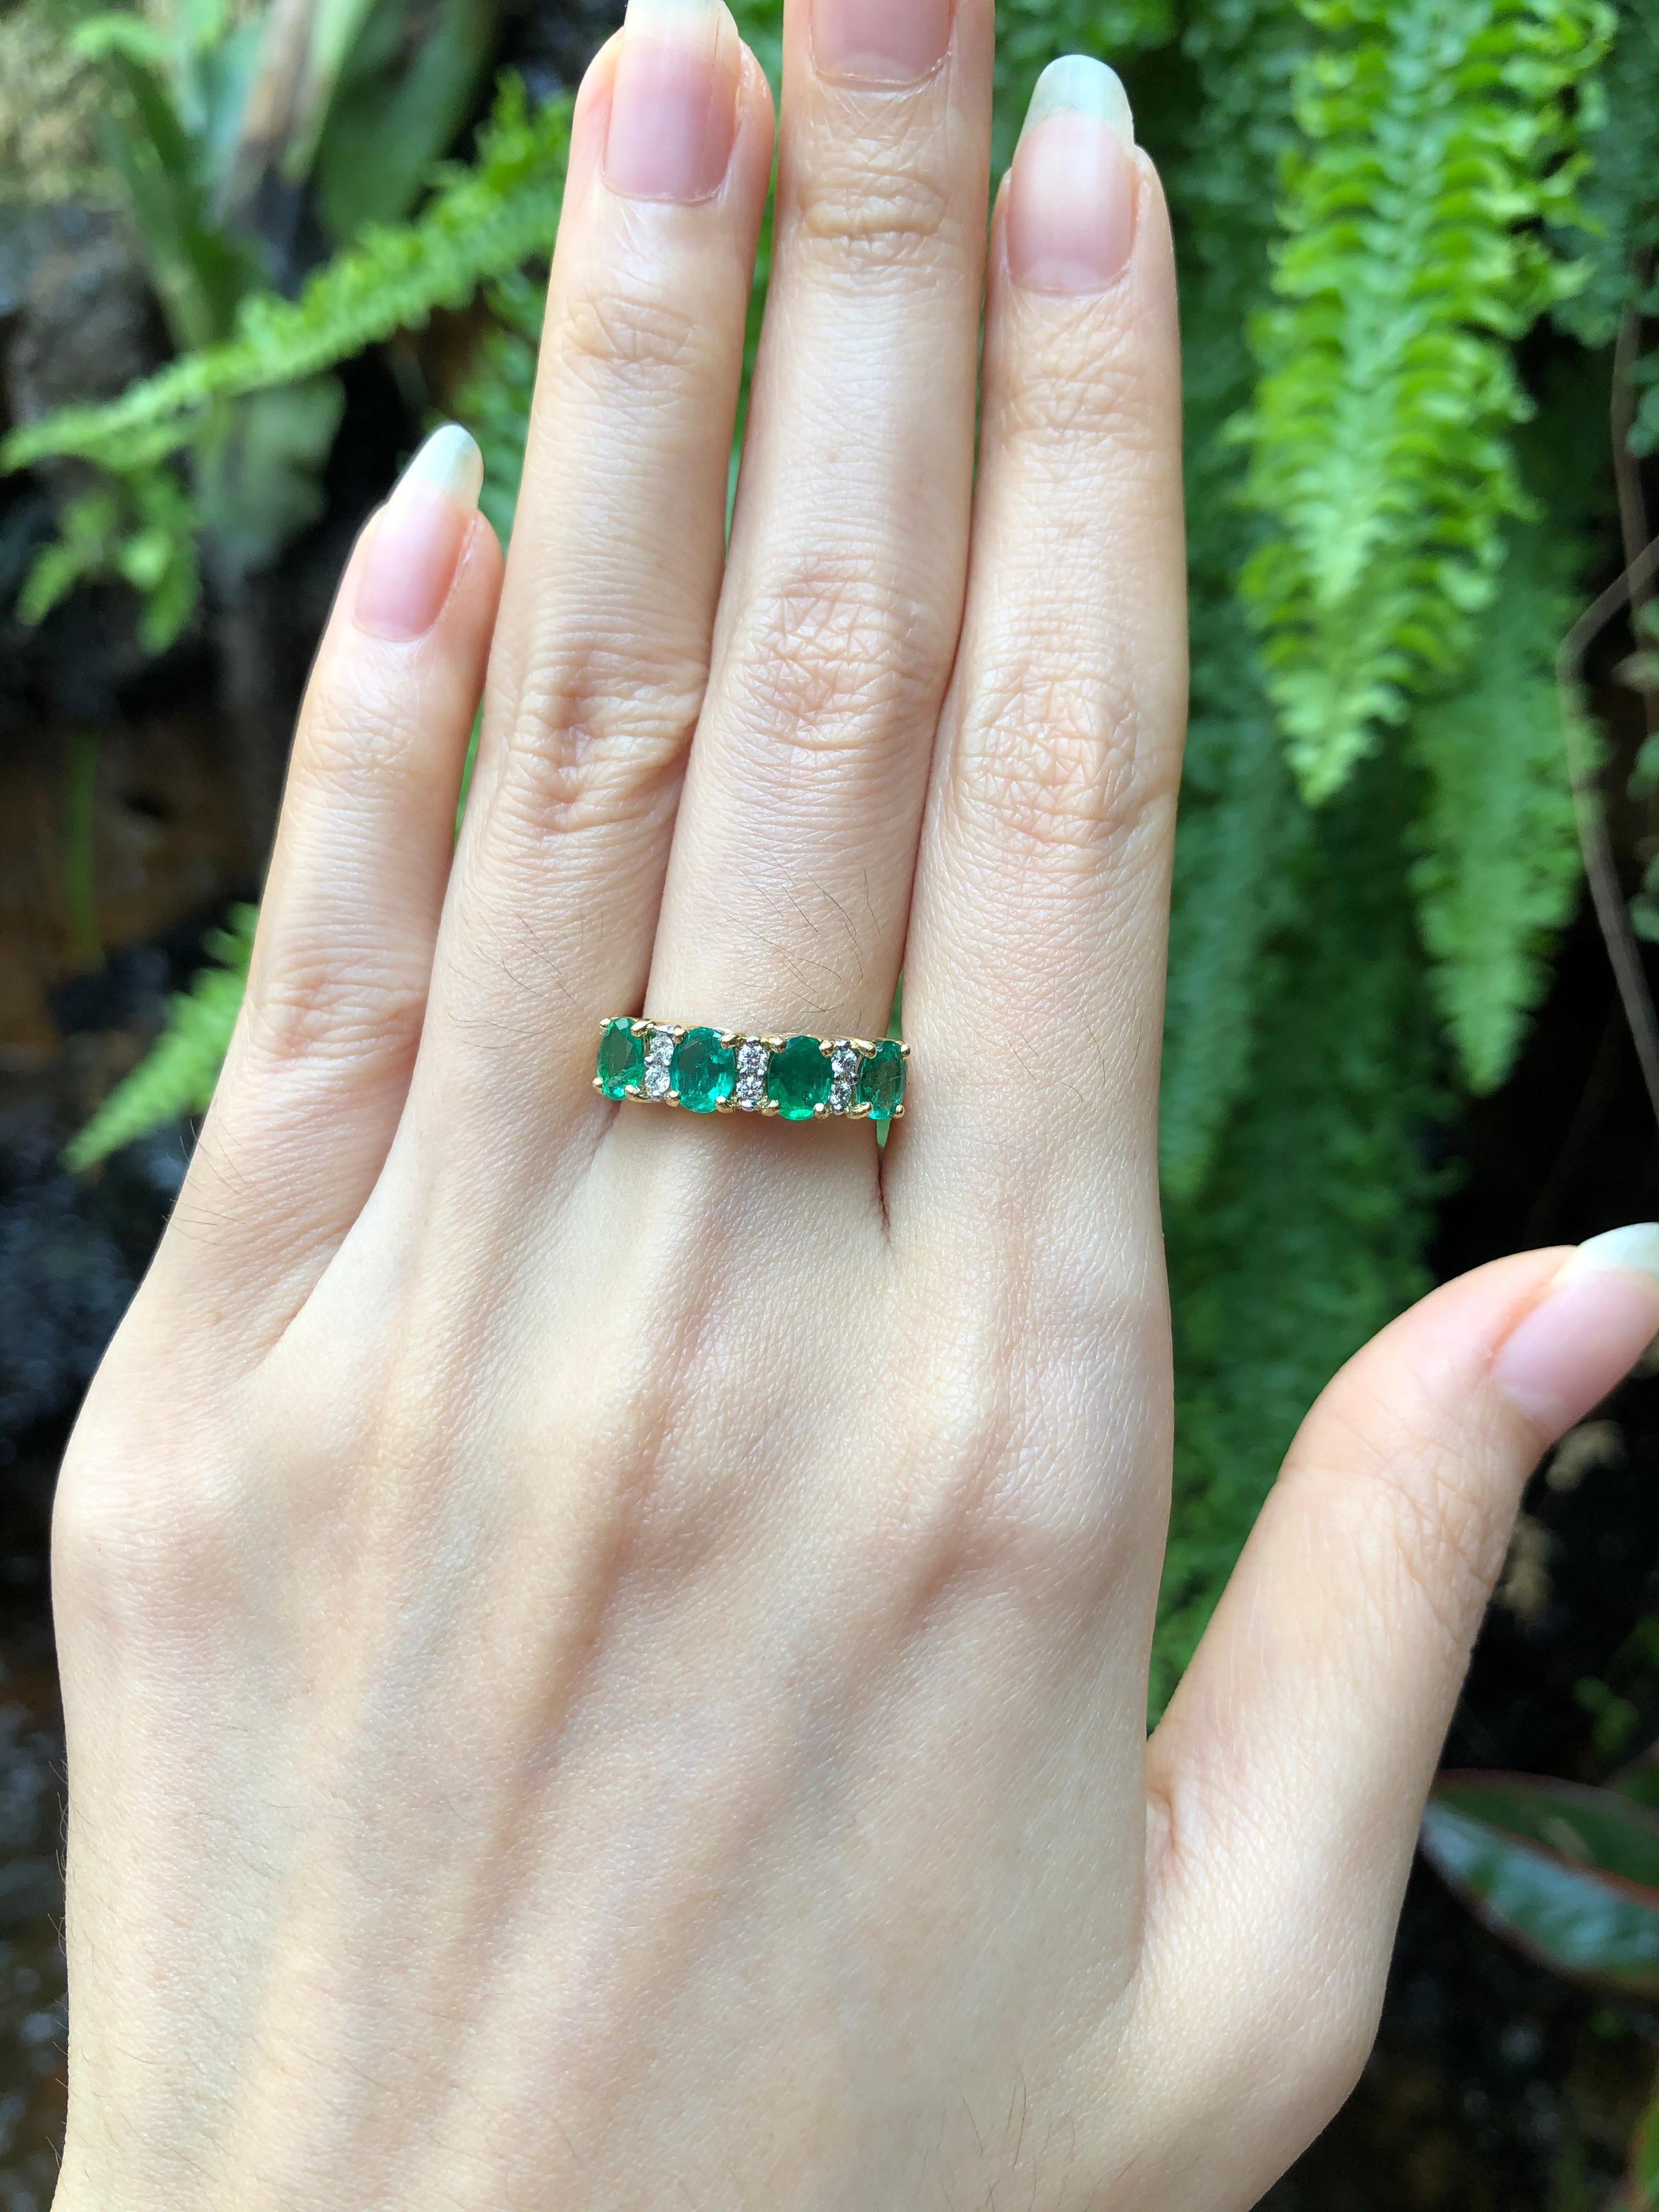 Emerald 1.26 carats with Diamond 0.10 carat Ring set in 18 Karat Gold Settings

Width:  1.9 cm 
Length: 0.4 cm
Ring Size: 54
Total Weight: 5.1 grams

